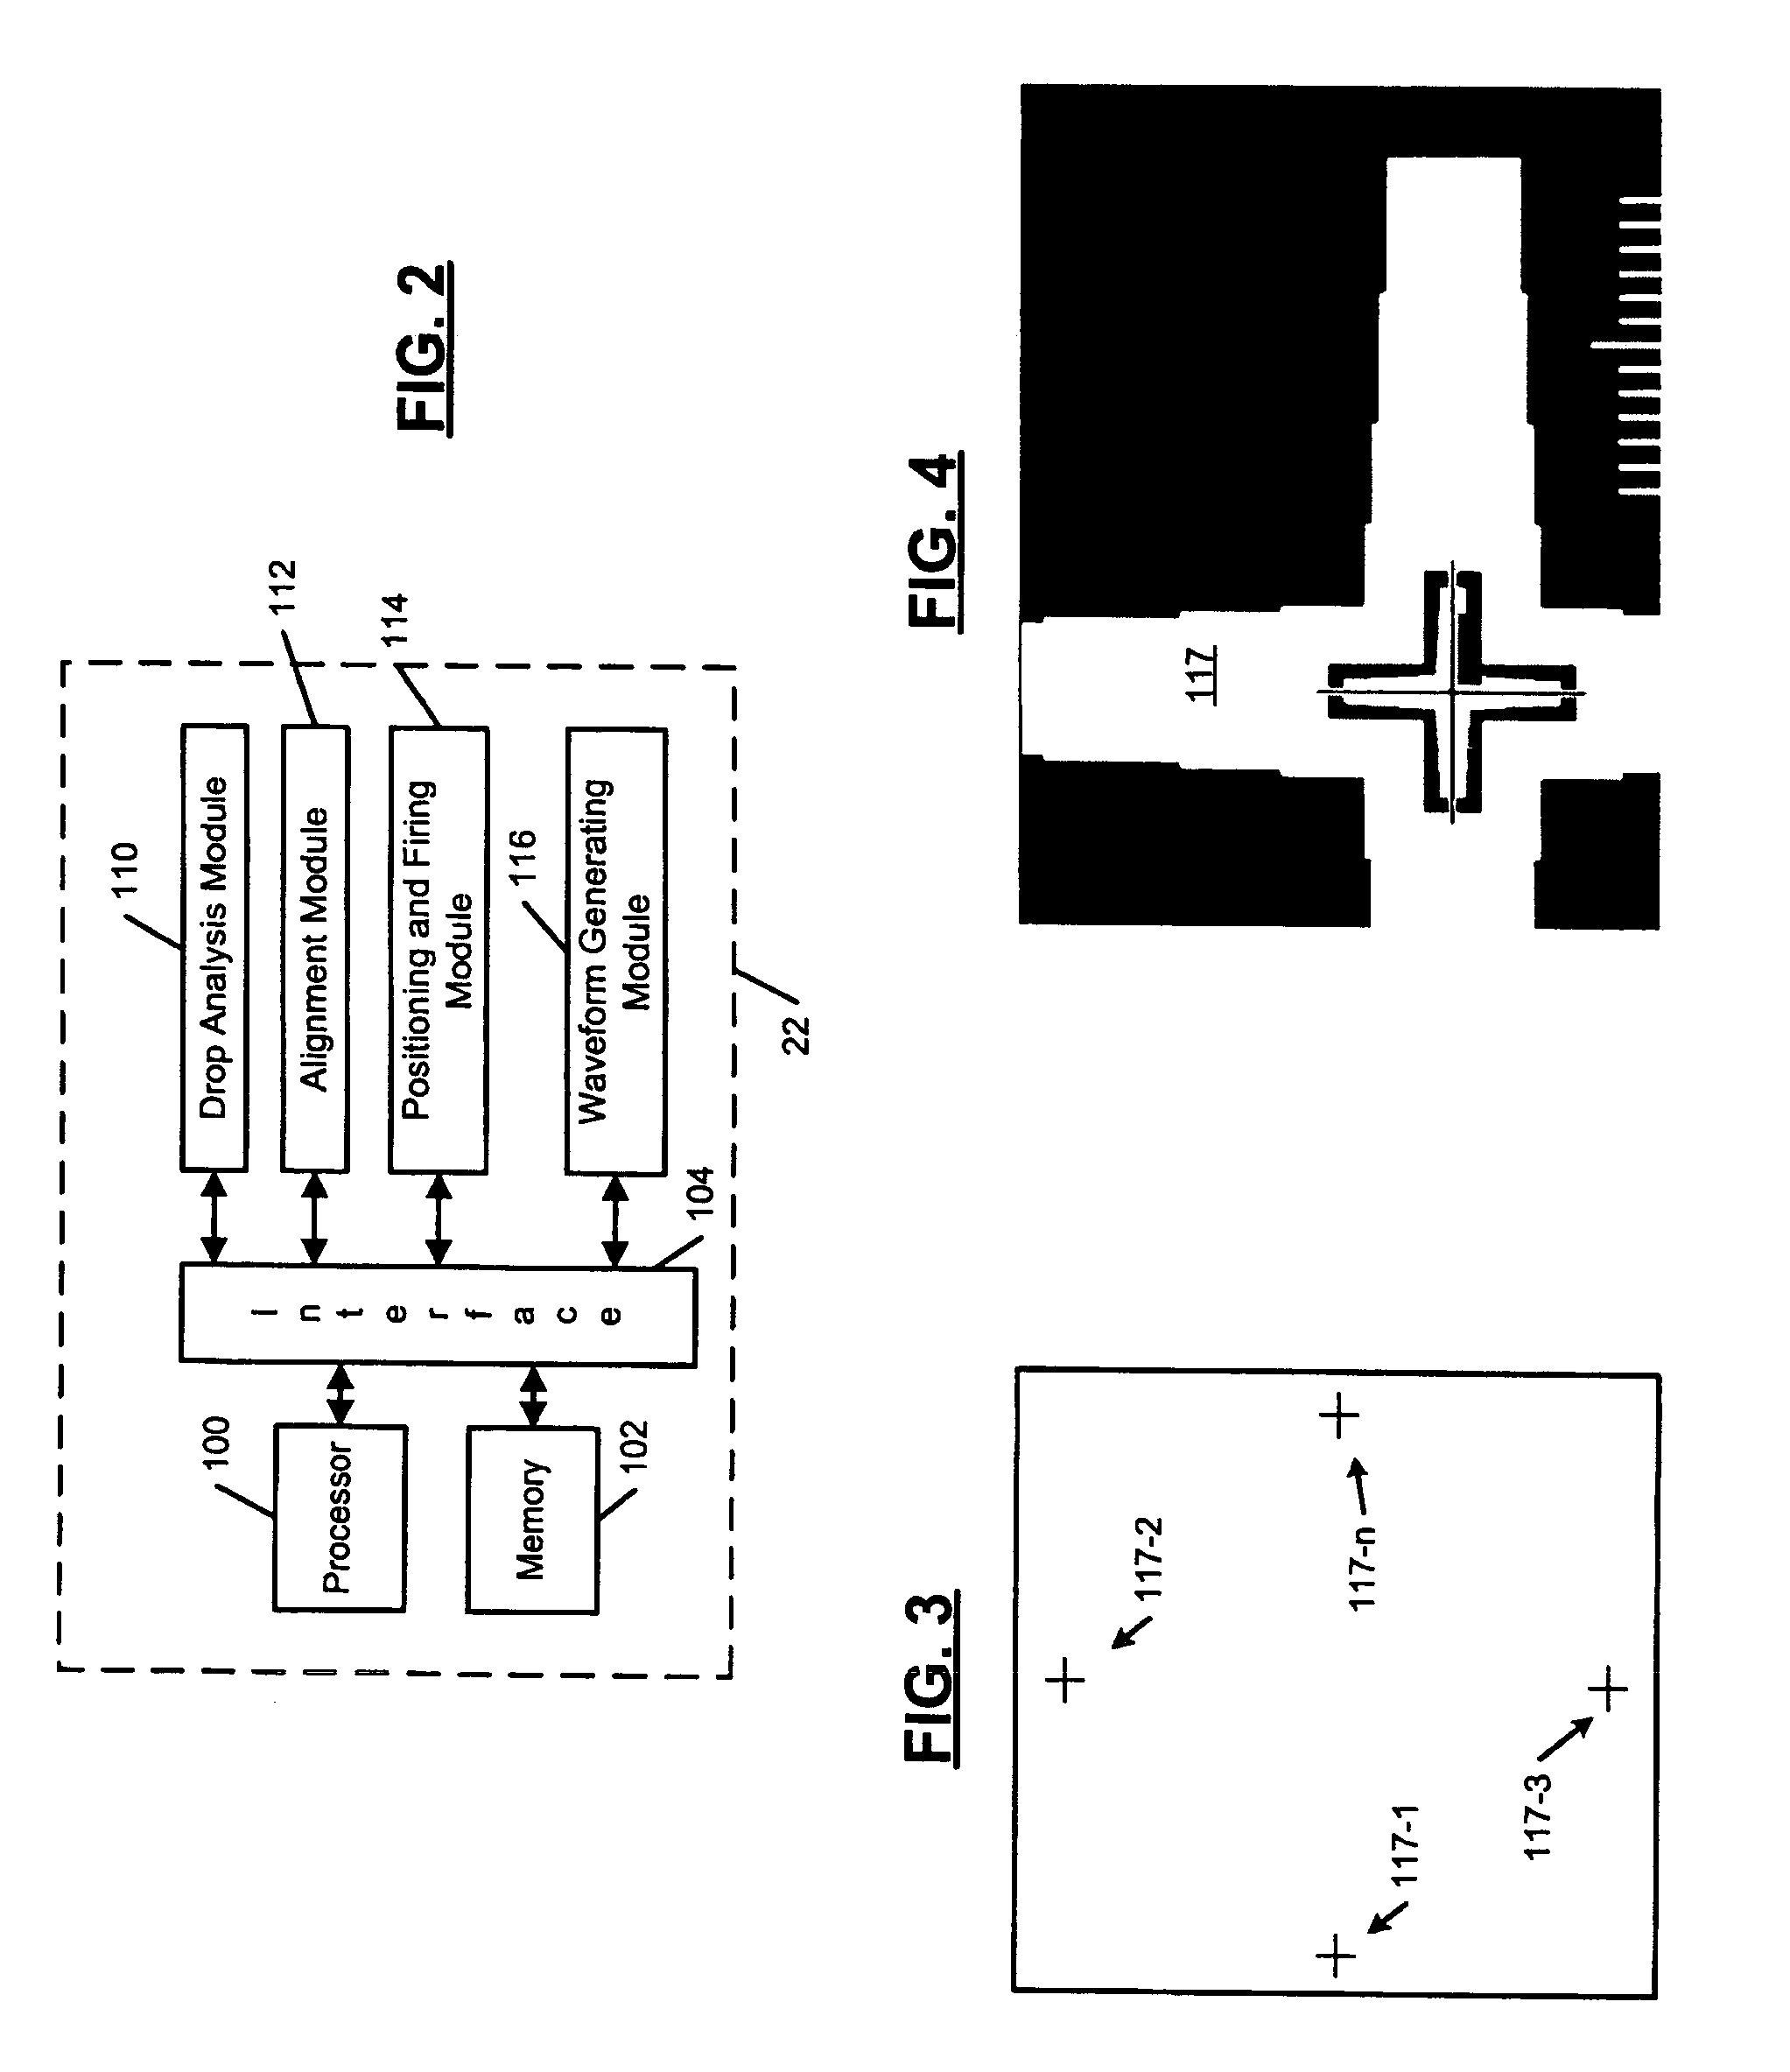 Industrial microdeposition system for polymer light emitting diode displays, printed circuit boards and the like